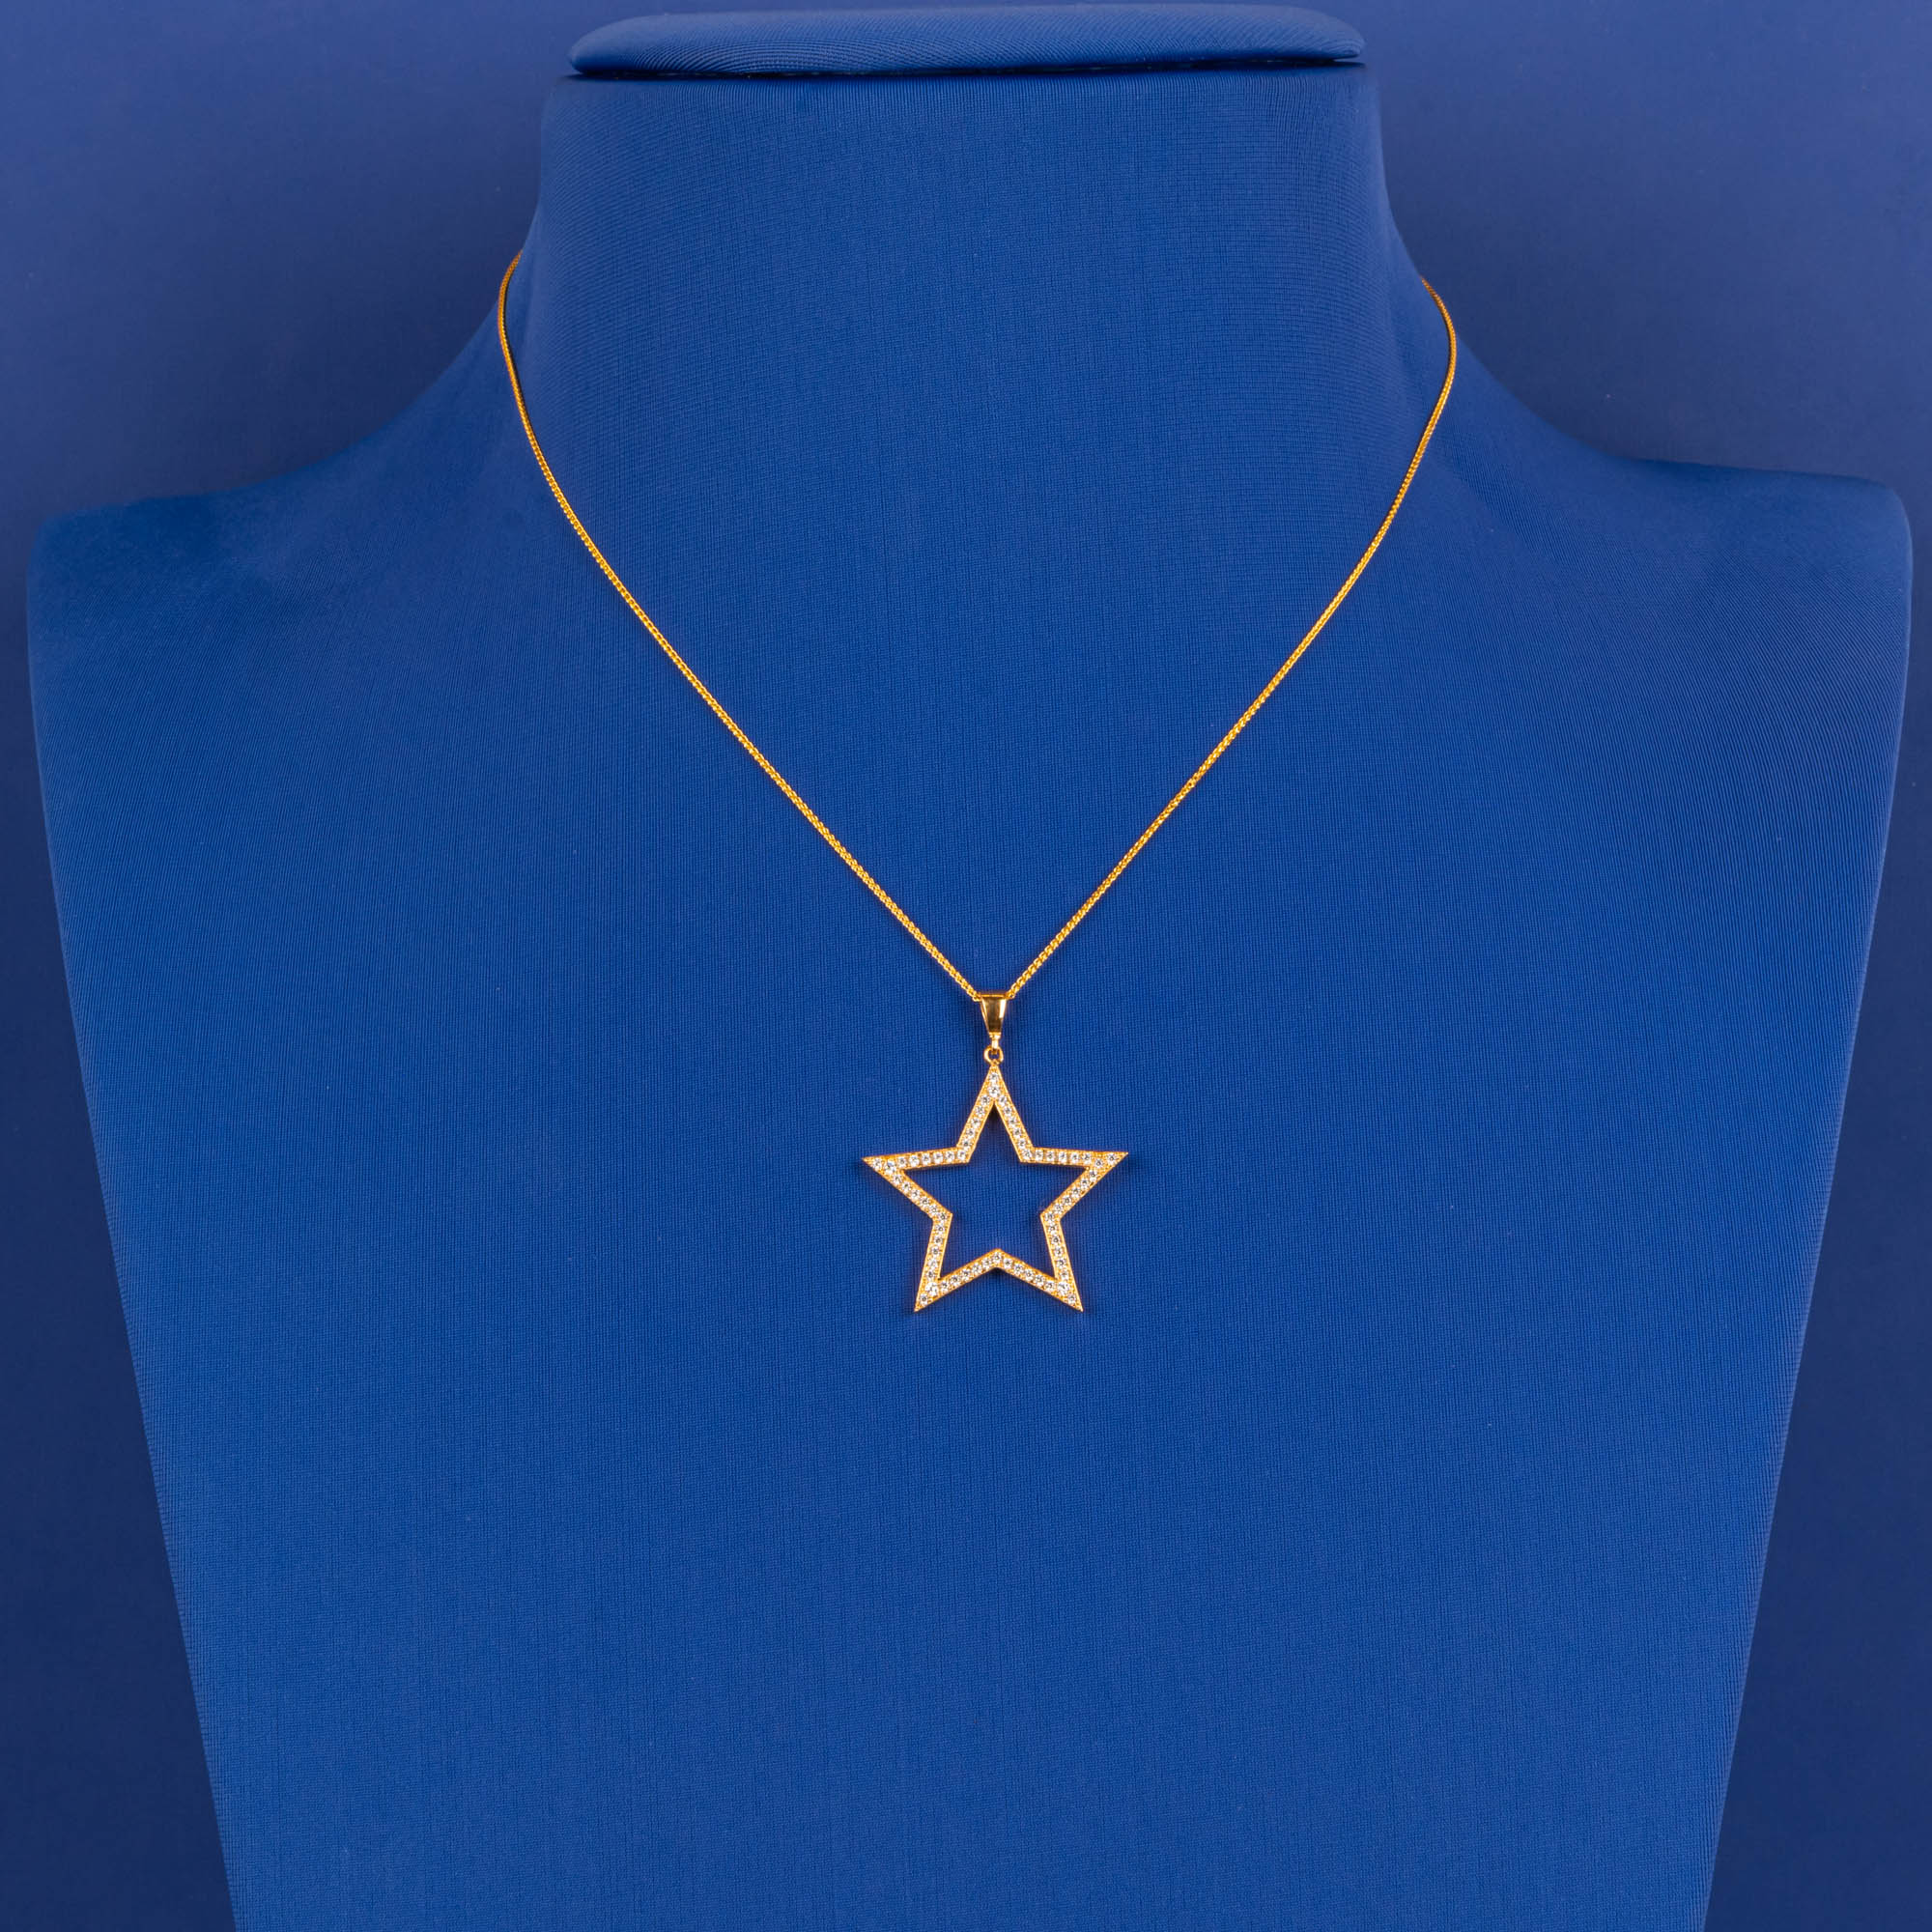 Starry Night: Handmade 22K Gold Cz Pendant with Radiant Design (chain not included)